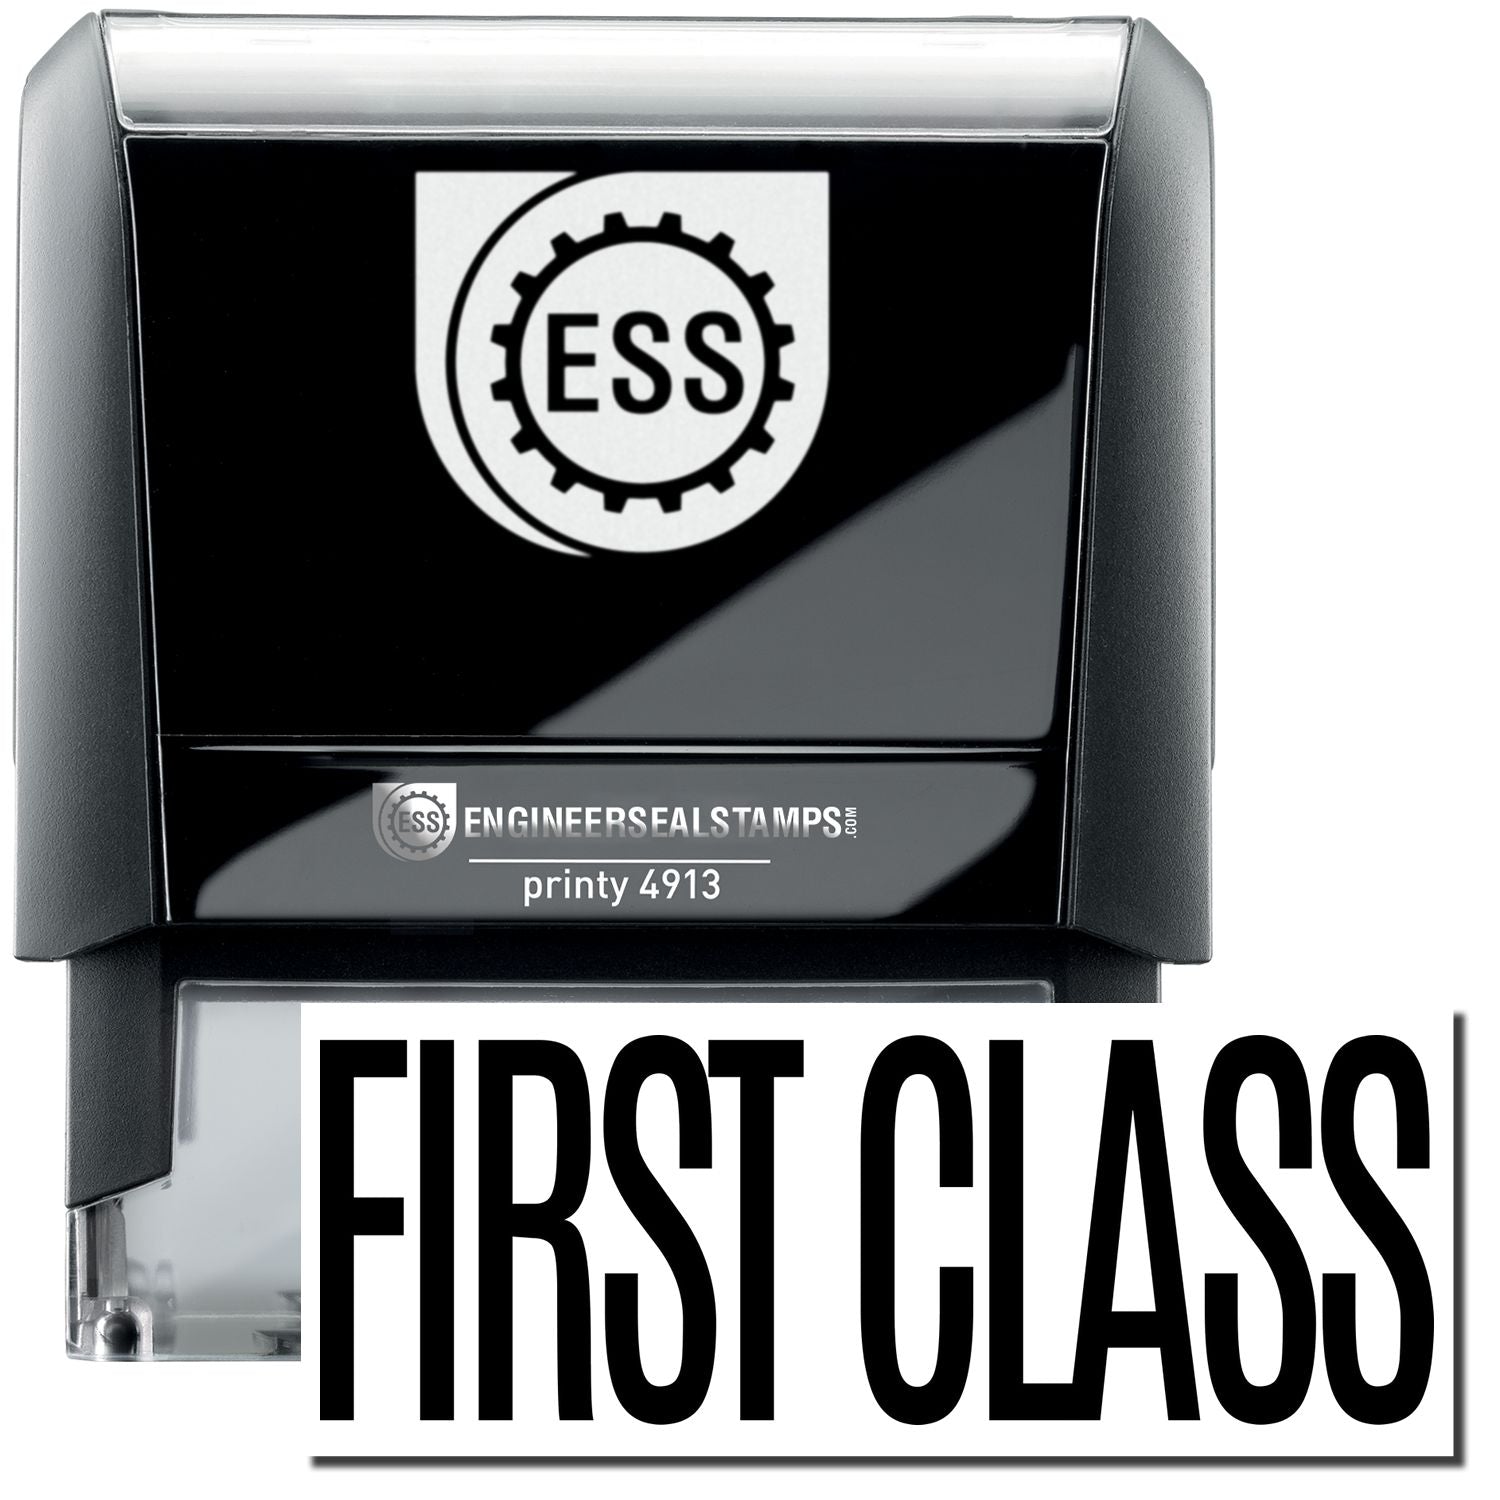 A self-inking stamp with a stamped image showing how the text "FIRST CLASS" in a large font is displayed by it after stamping.